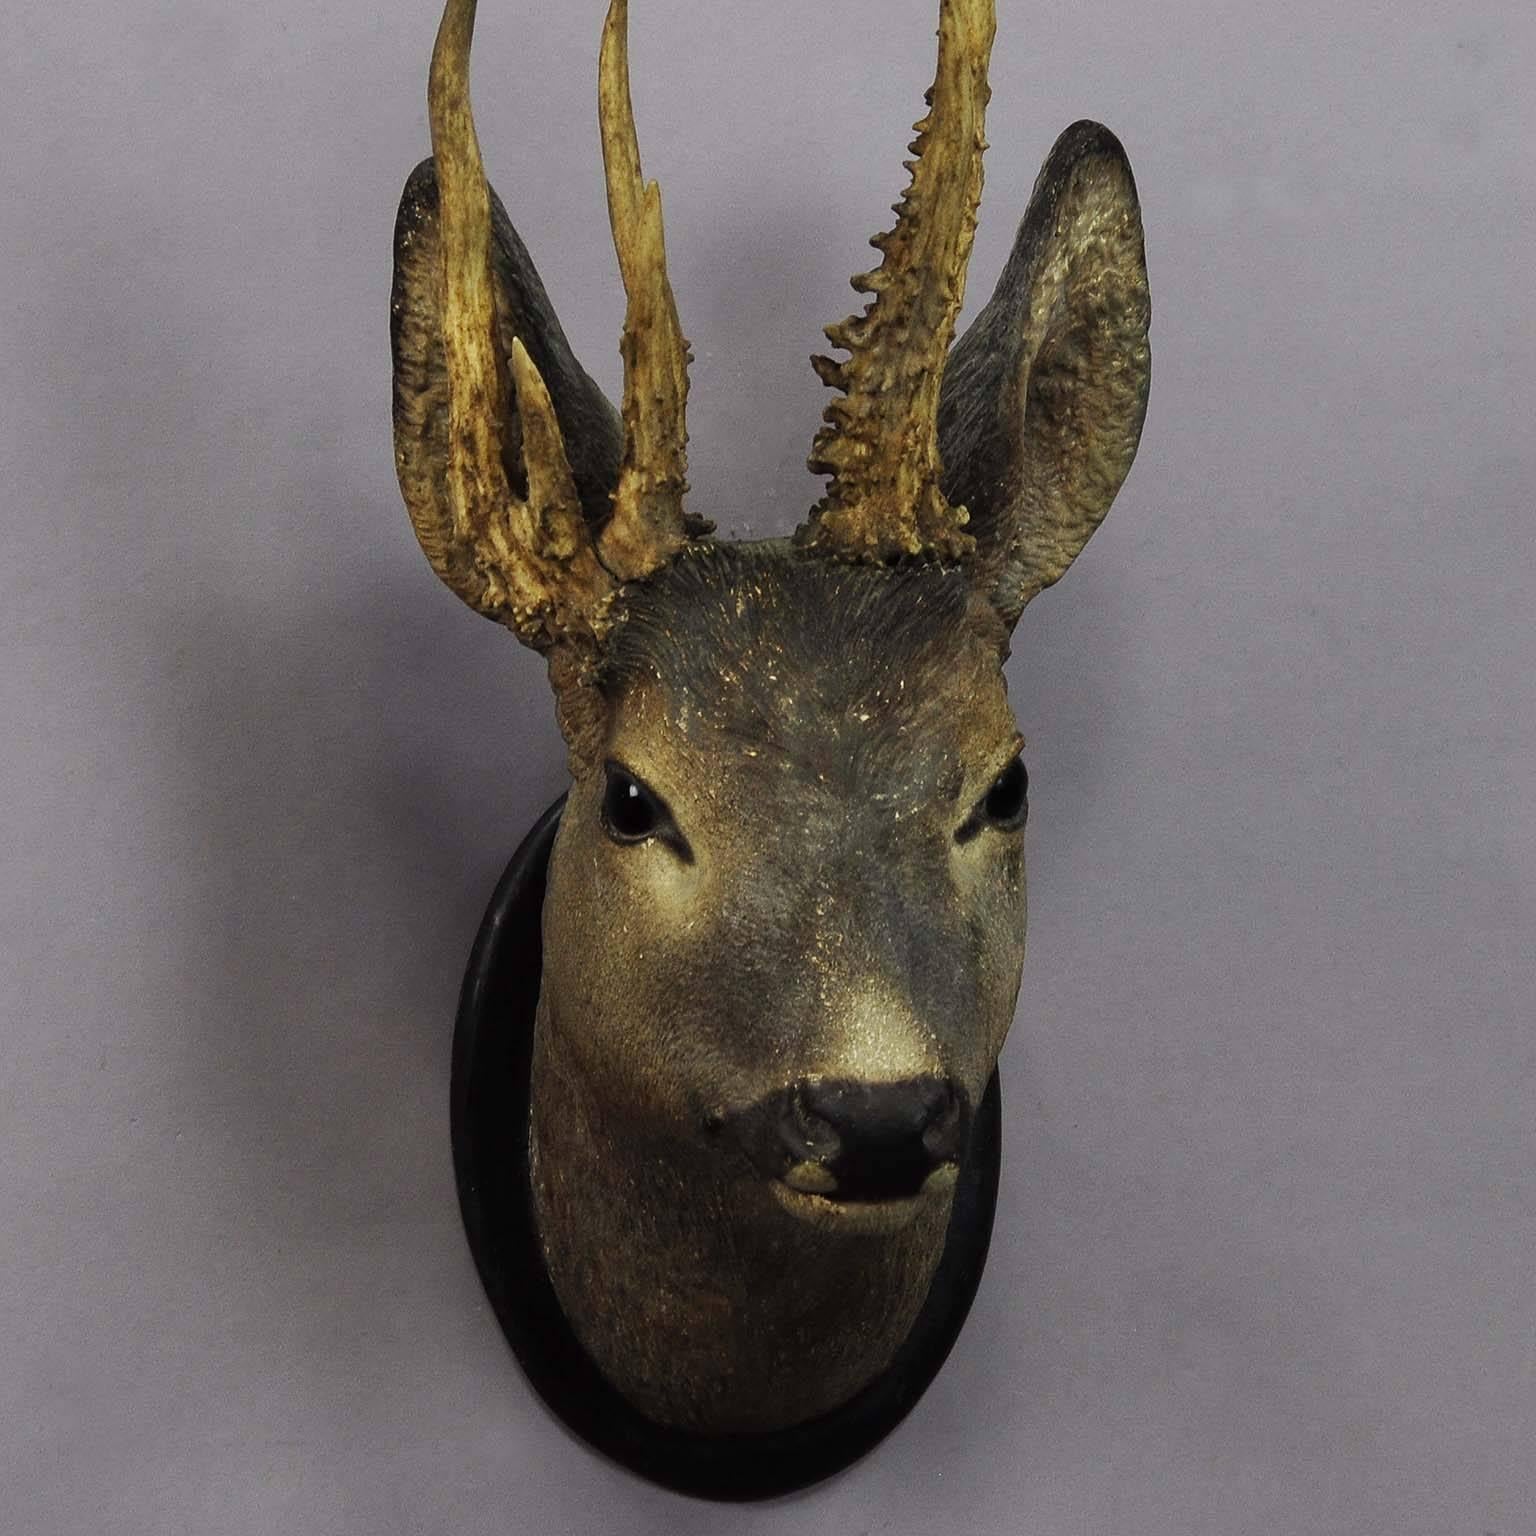 19th Century Manorial Black Forest Deer Head with Abnorm Antlers